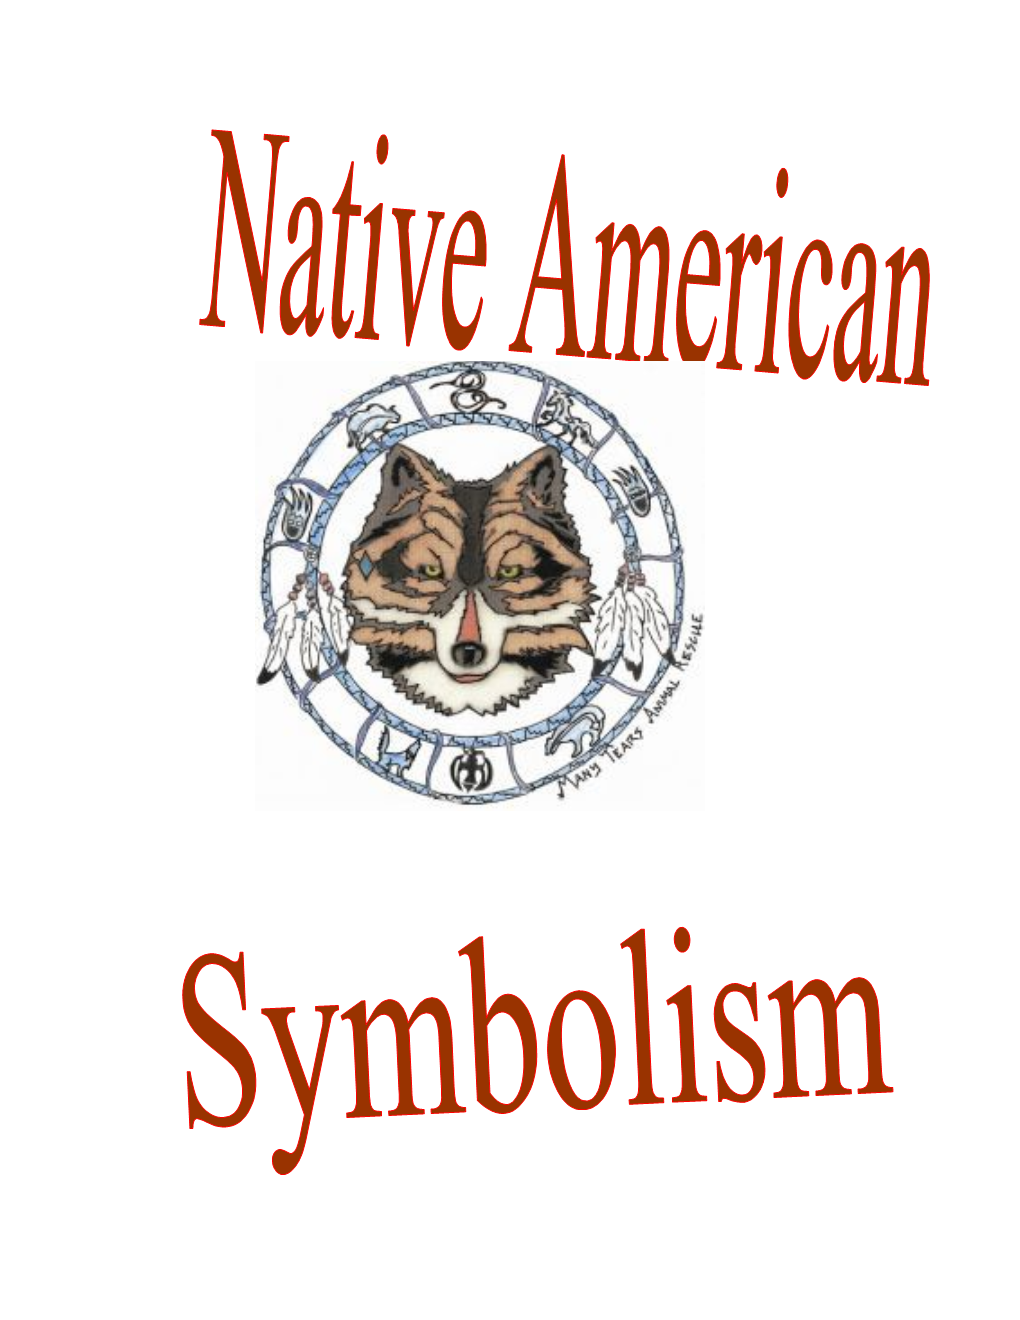 In the Native American Tradition, Man Communicated with the Creator Through Interaction